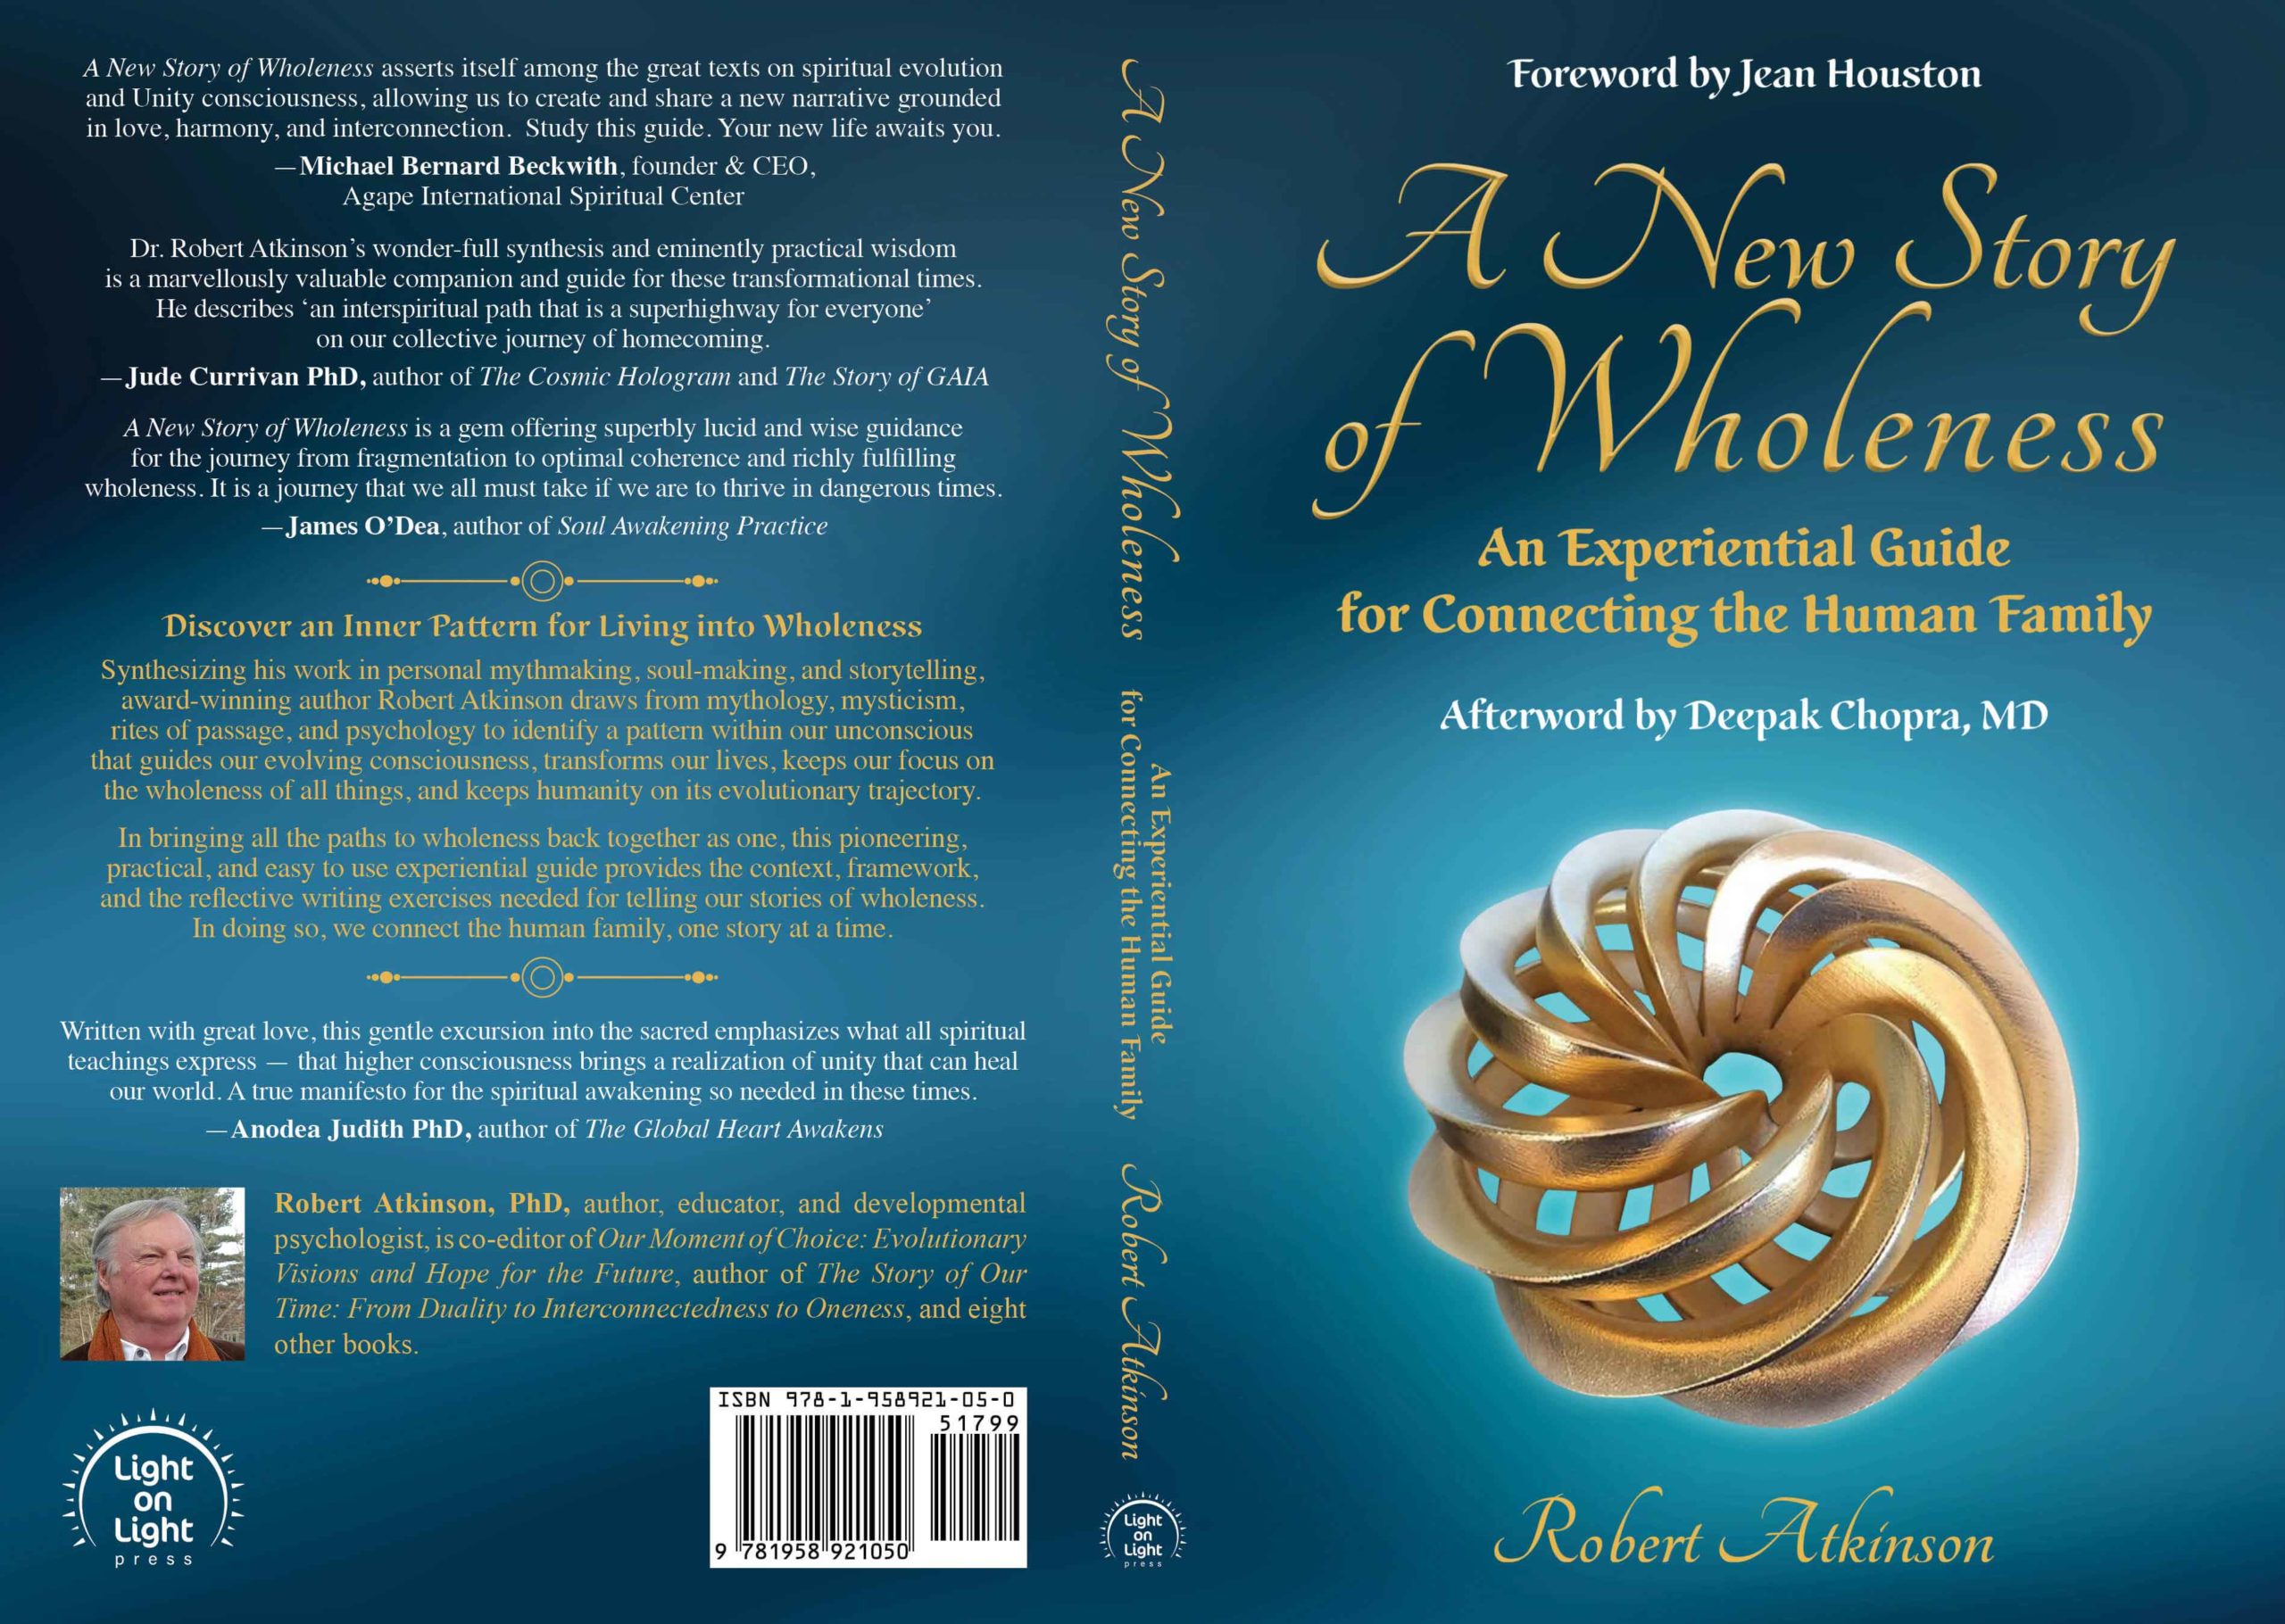 Light on Light Press’s new book A NEW STORY OF WHOLENESS AN